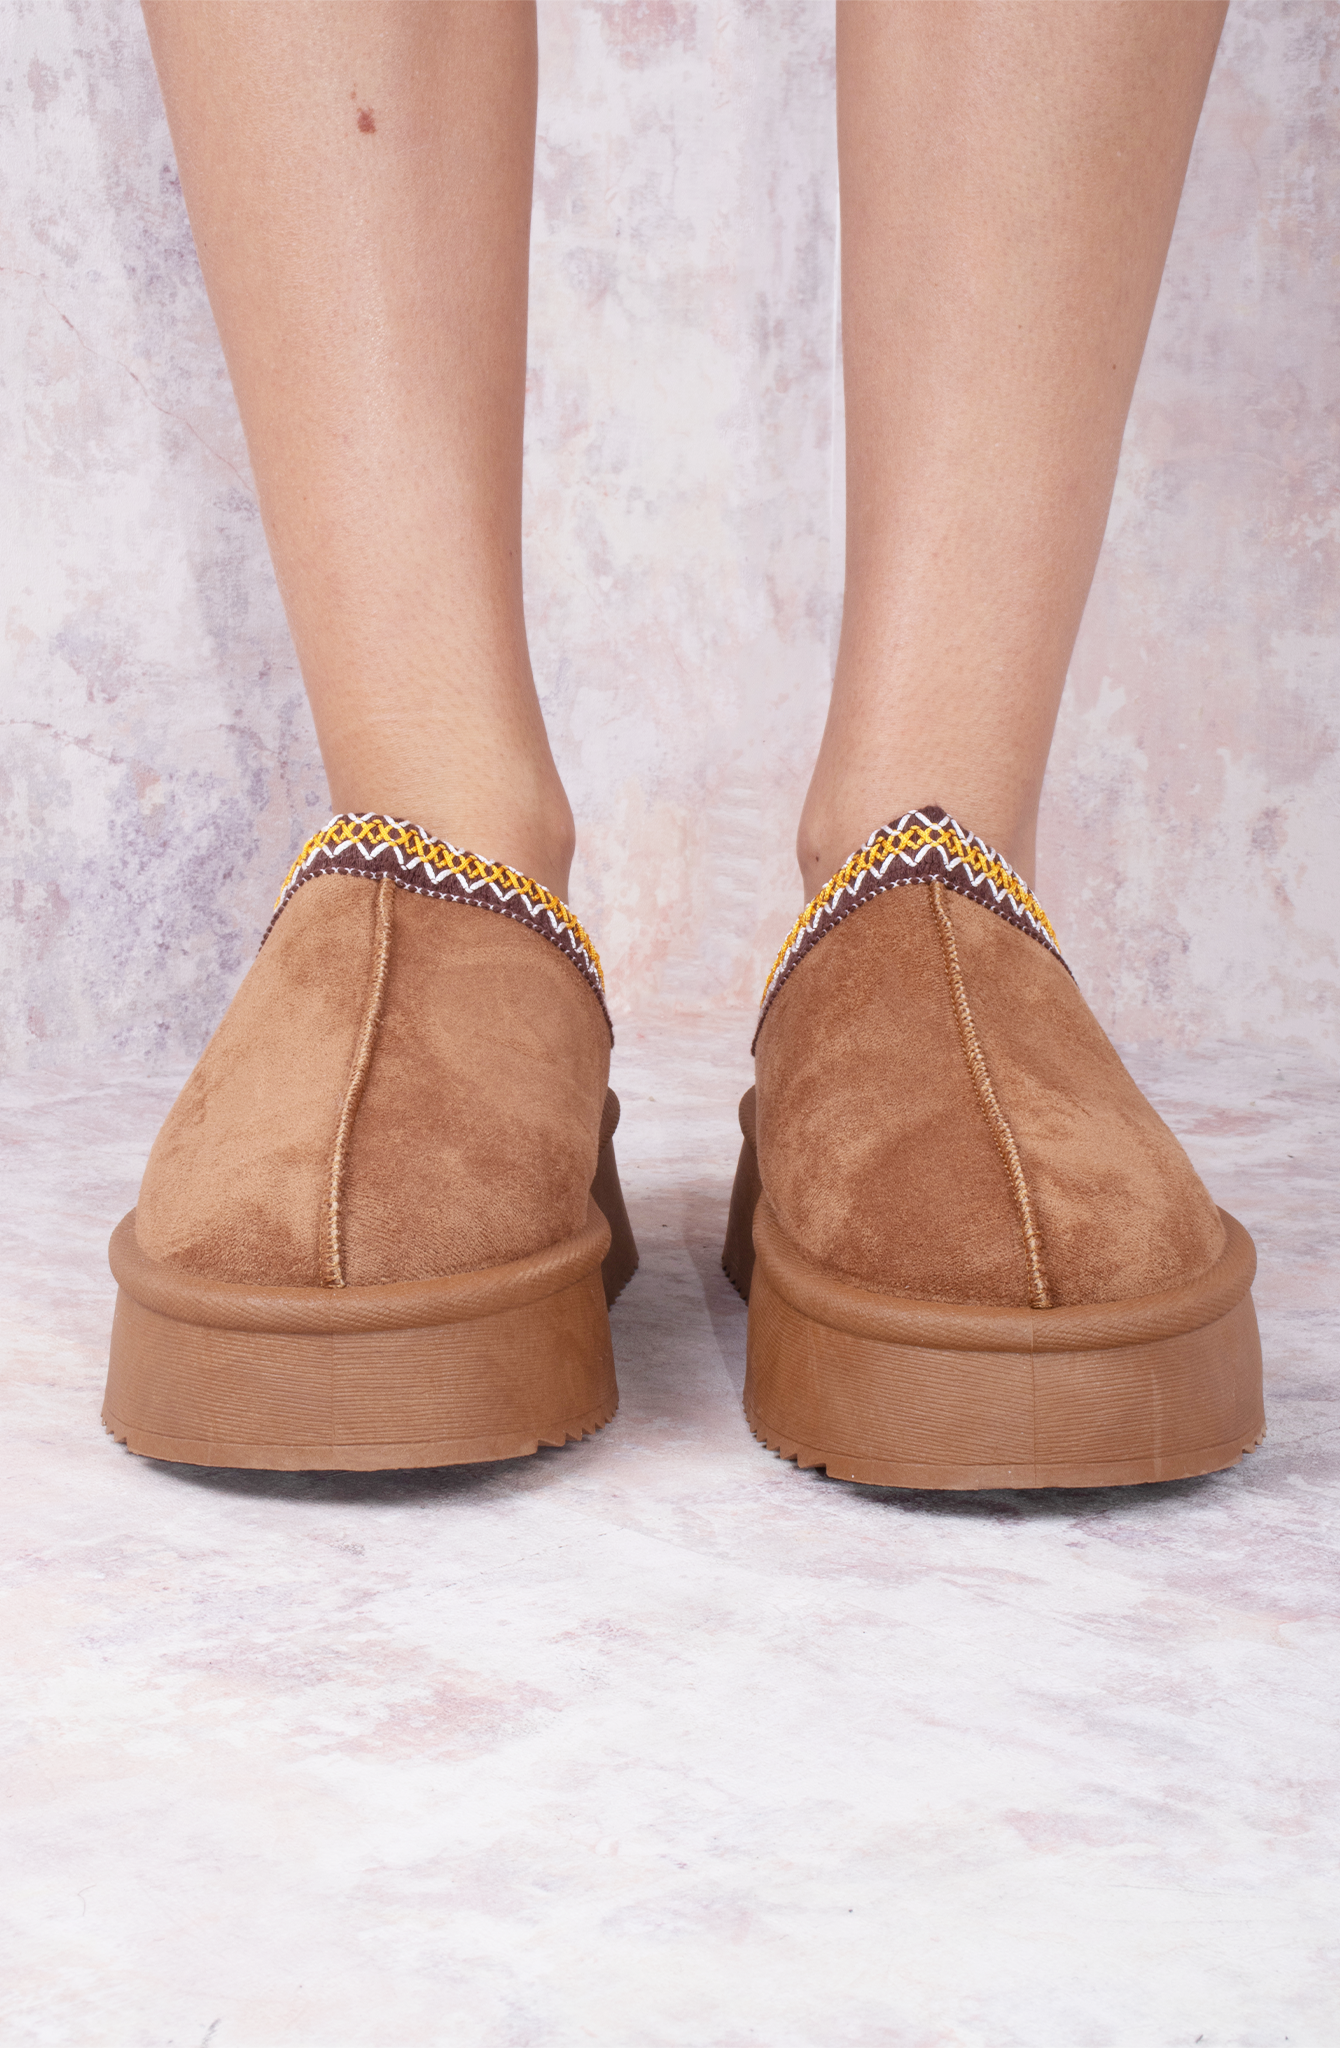 Load image into Gallery viewer, Camel Tazmin Aztec Detail Faux Fur Lining Platform Faux Suede Slipper
